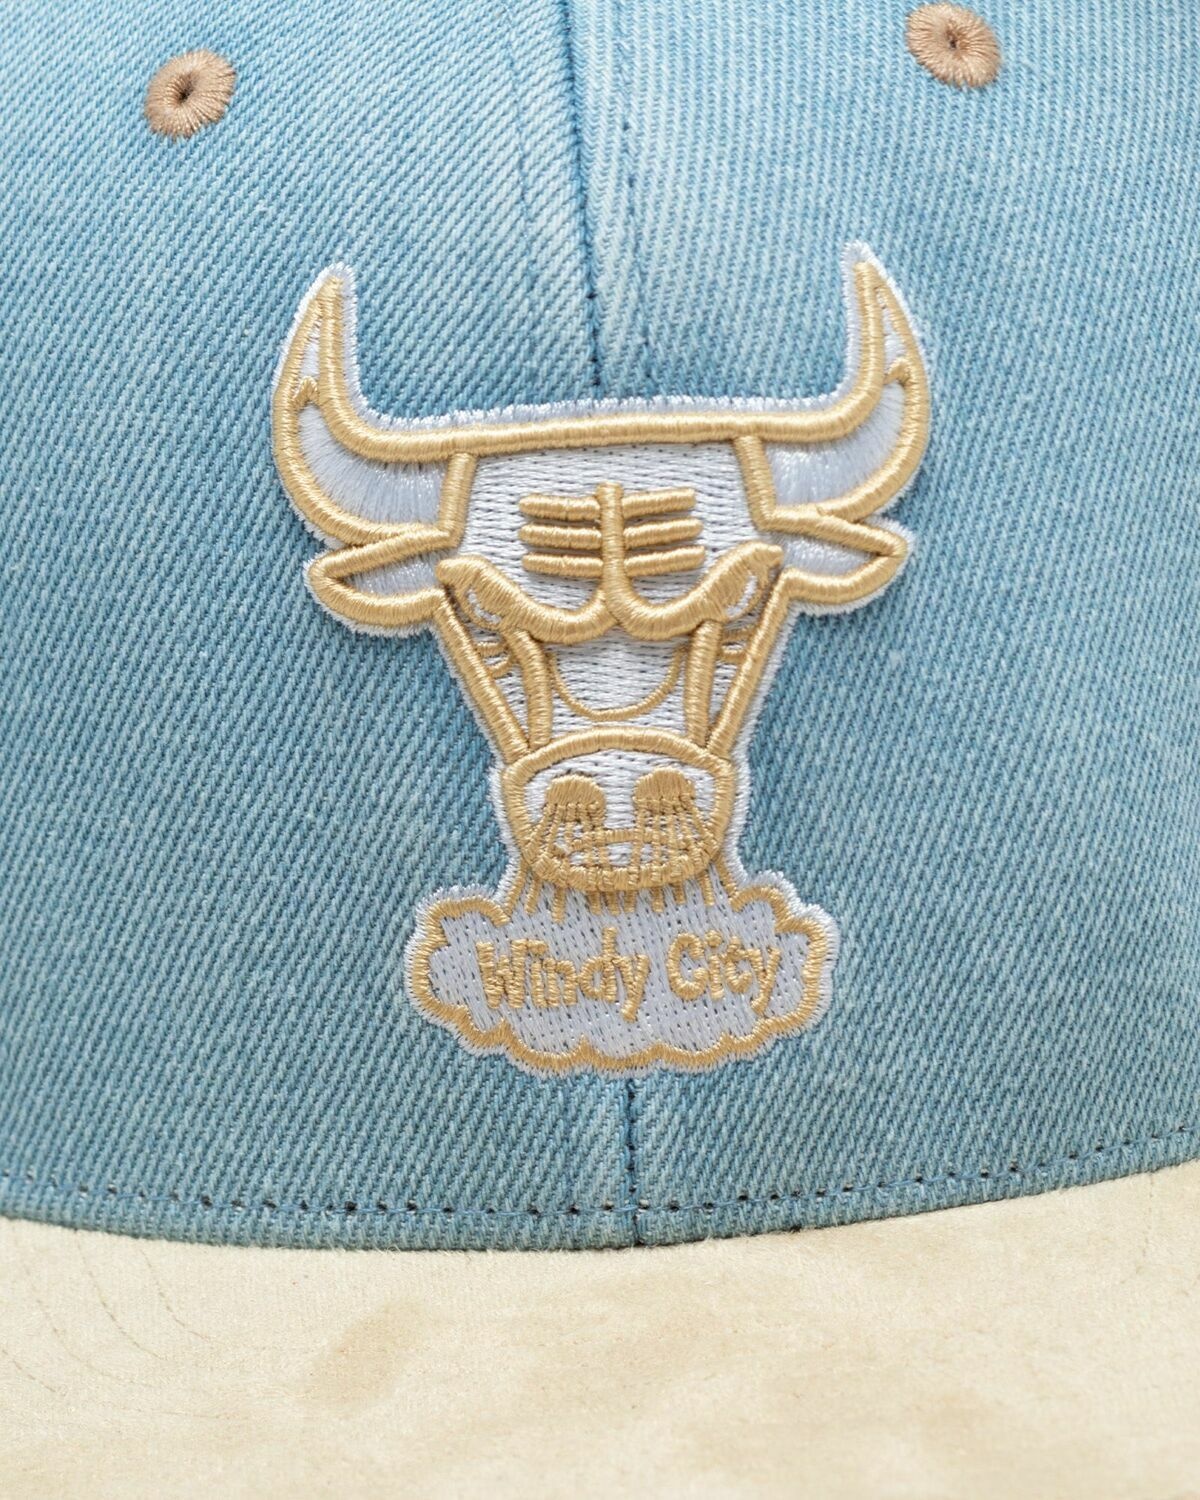 Mitchell & Ness Nba Blue Jean Baby Fitted Hwc Bulls Blue/Beige - Mens - Caps